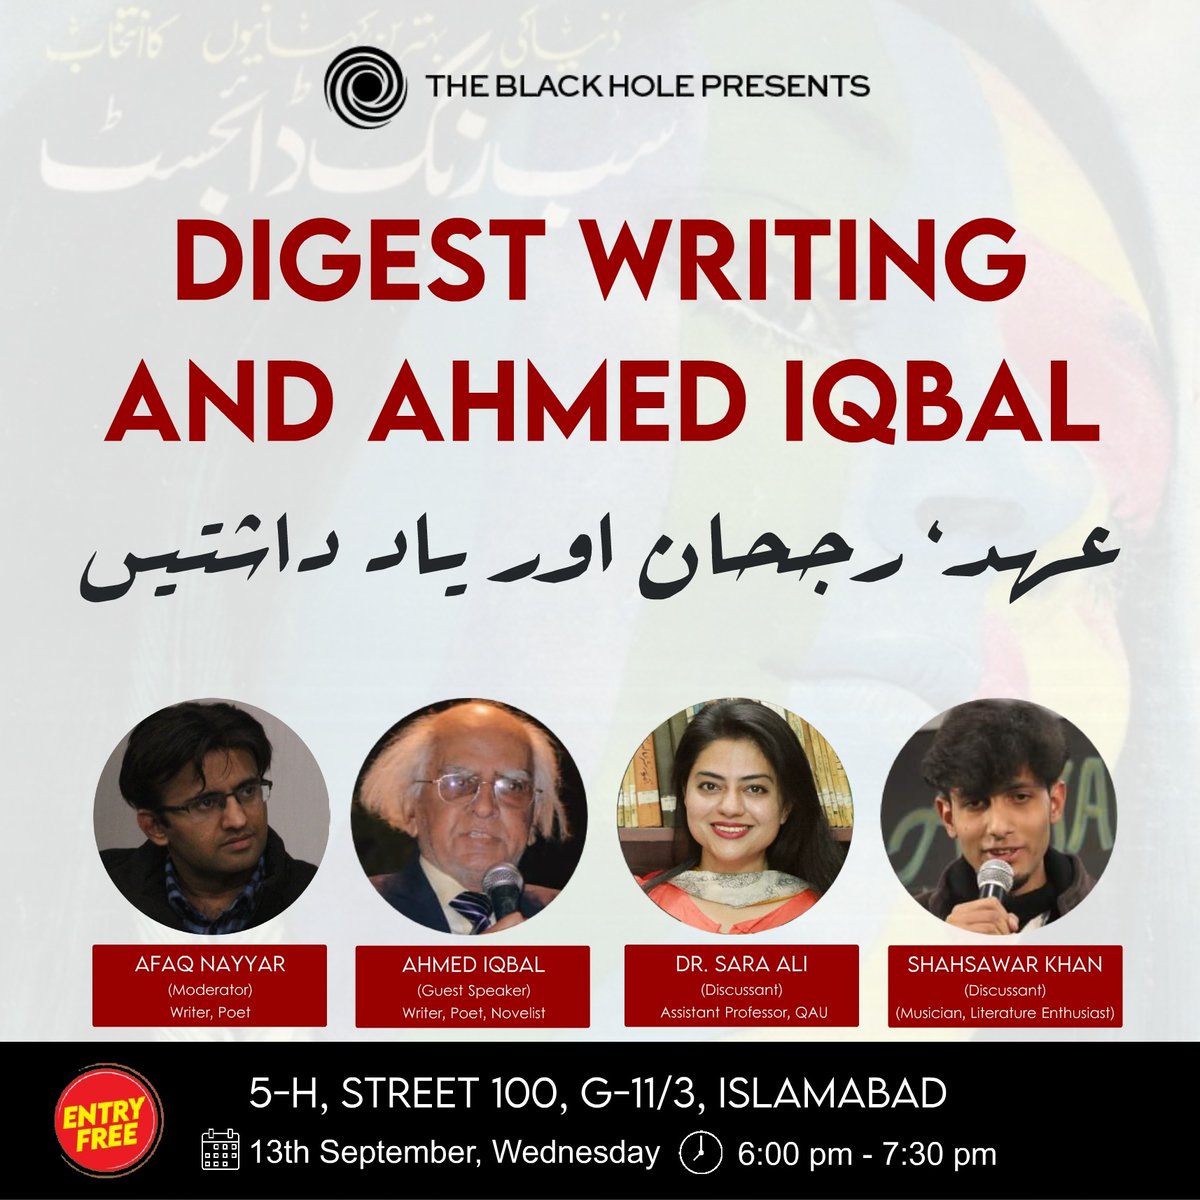 Join us for a journey through the golden era of digest writing, as we welcome Ahmed Iqbal, one of the legendary writers of Pakistan.

#theblackhole #theblackholeislamabad #tbhislamabad #Pakistan #India #Digests #Magazines #Stories #Nostalgia #Islamabad #IslamabadEvents